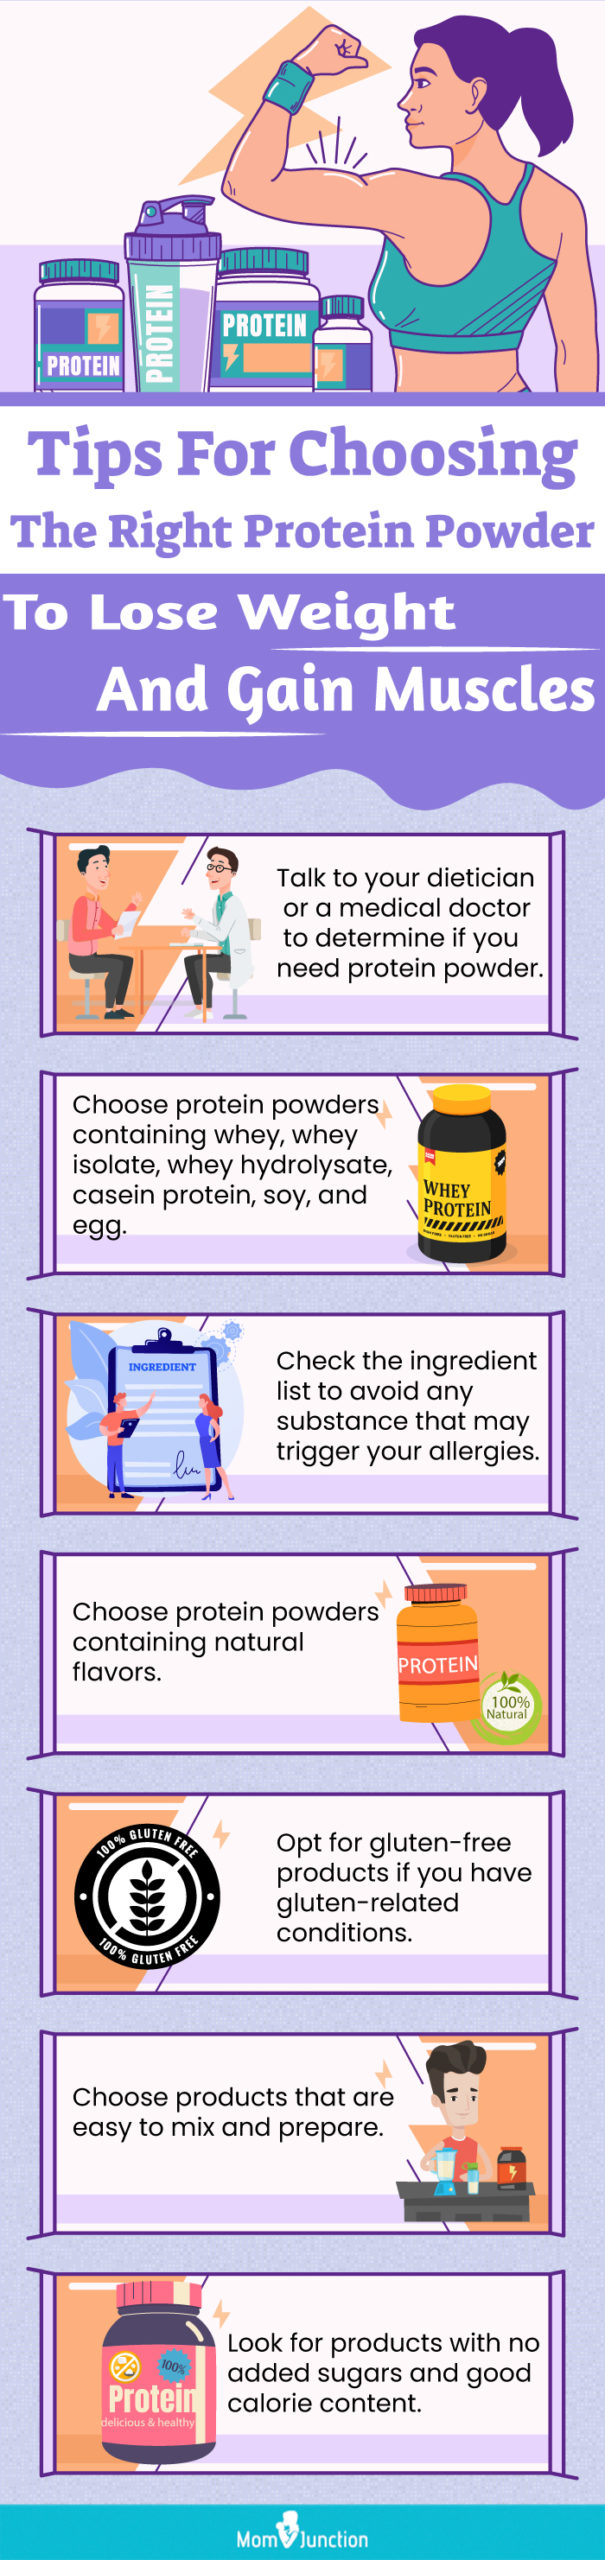 Tips For Choosing The Right Protein Powder To Lose Weight And Gain Muscles (infographic)